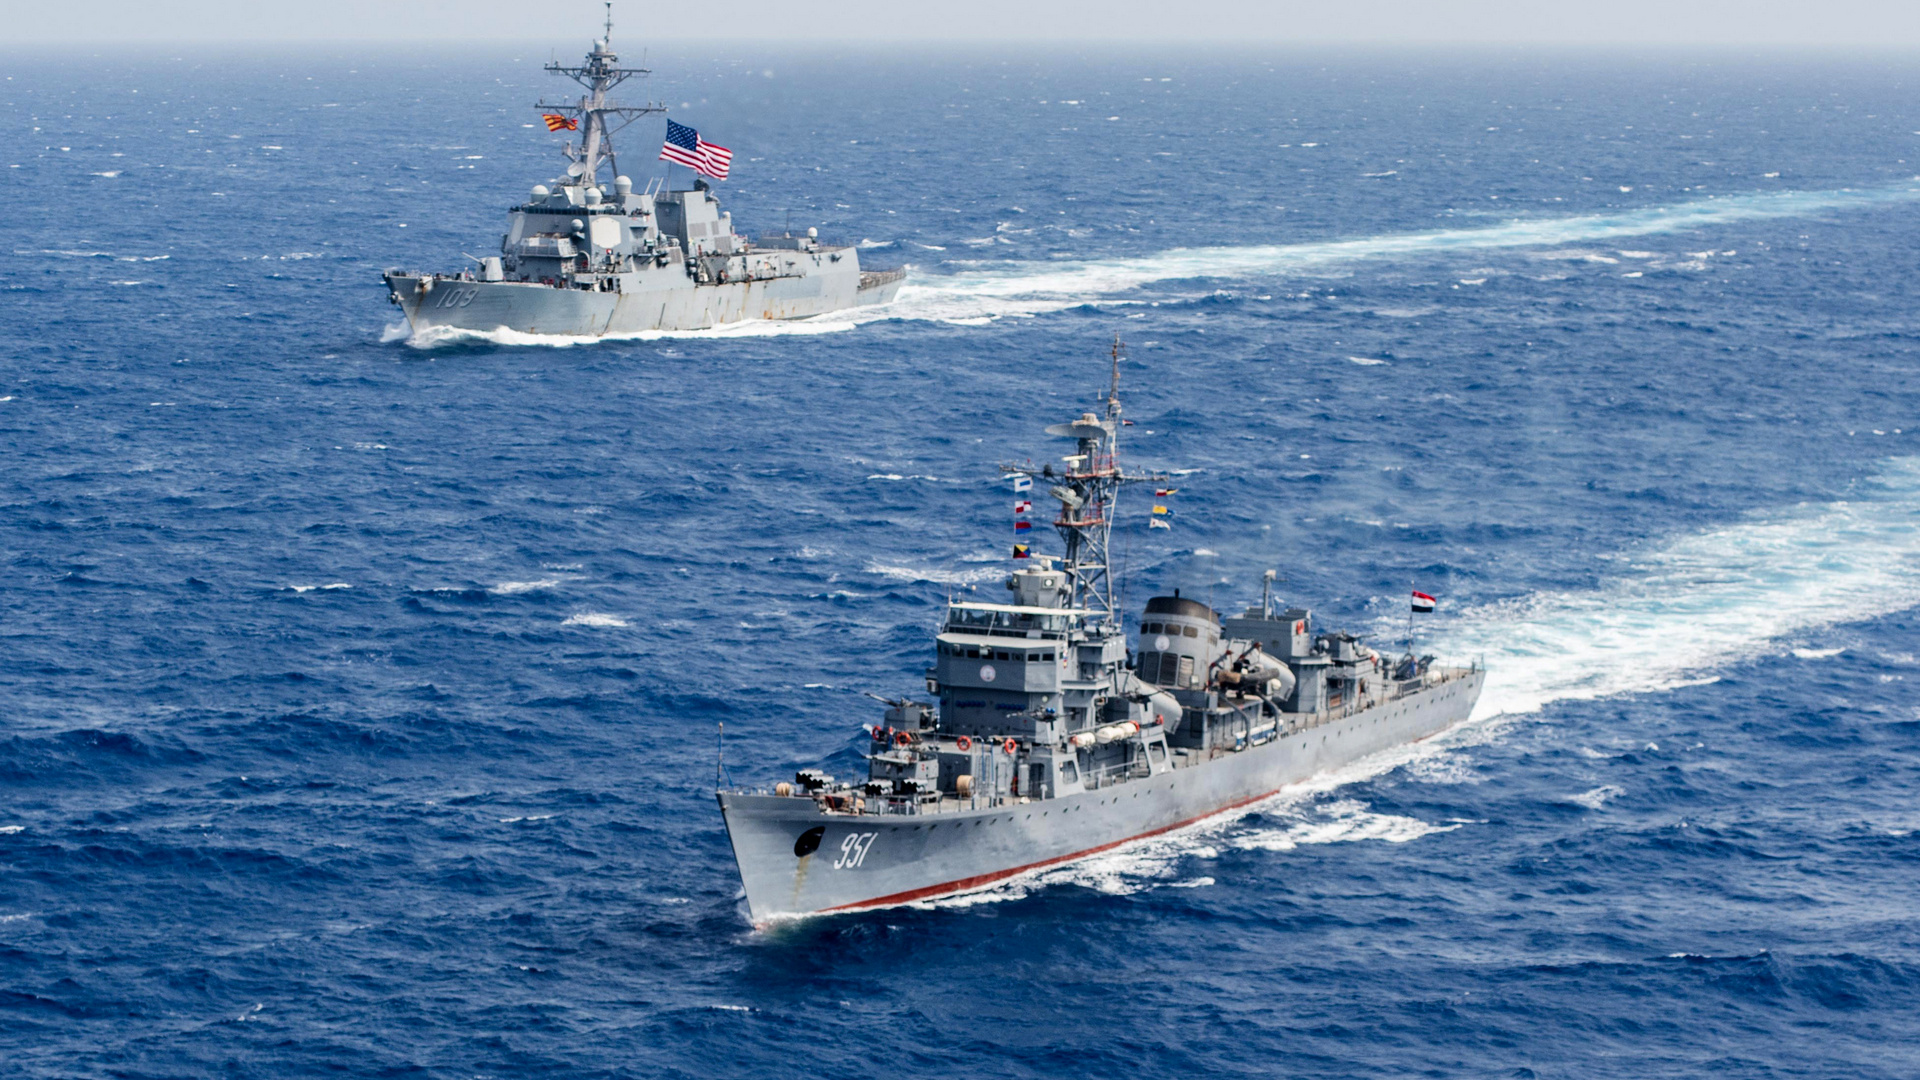 U.S. 5th Fleet Area of Operations : (July 1, 2018) The Egyptian navy frigate El Zafer (F951), bottom right, conducts a passing exercise with the guided-missile destroyer USS Jason Dunham (DDG 109). Jason Dunham is deployed to the U.S. 5th Fleet area of operations in support of naval operations to ensure maritime stability and security in the Central region, connecting the Mediterranean and the Pacific through the western Indian Ocean and three strategic choke points. U.S. Navy photo by Mass Communication Specialist 3rd Class Jonathan Clay -